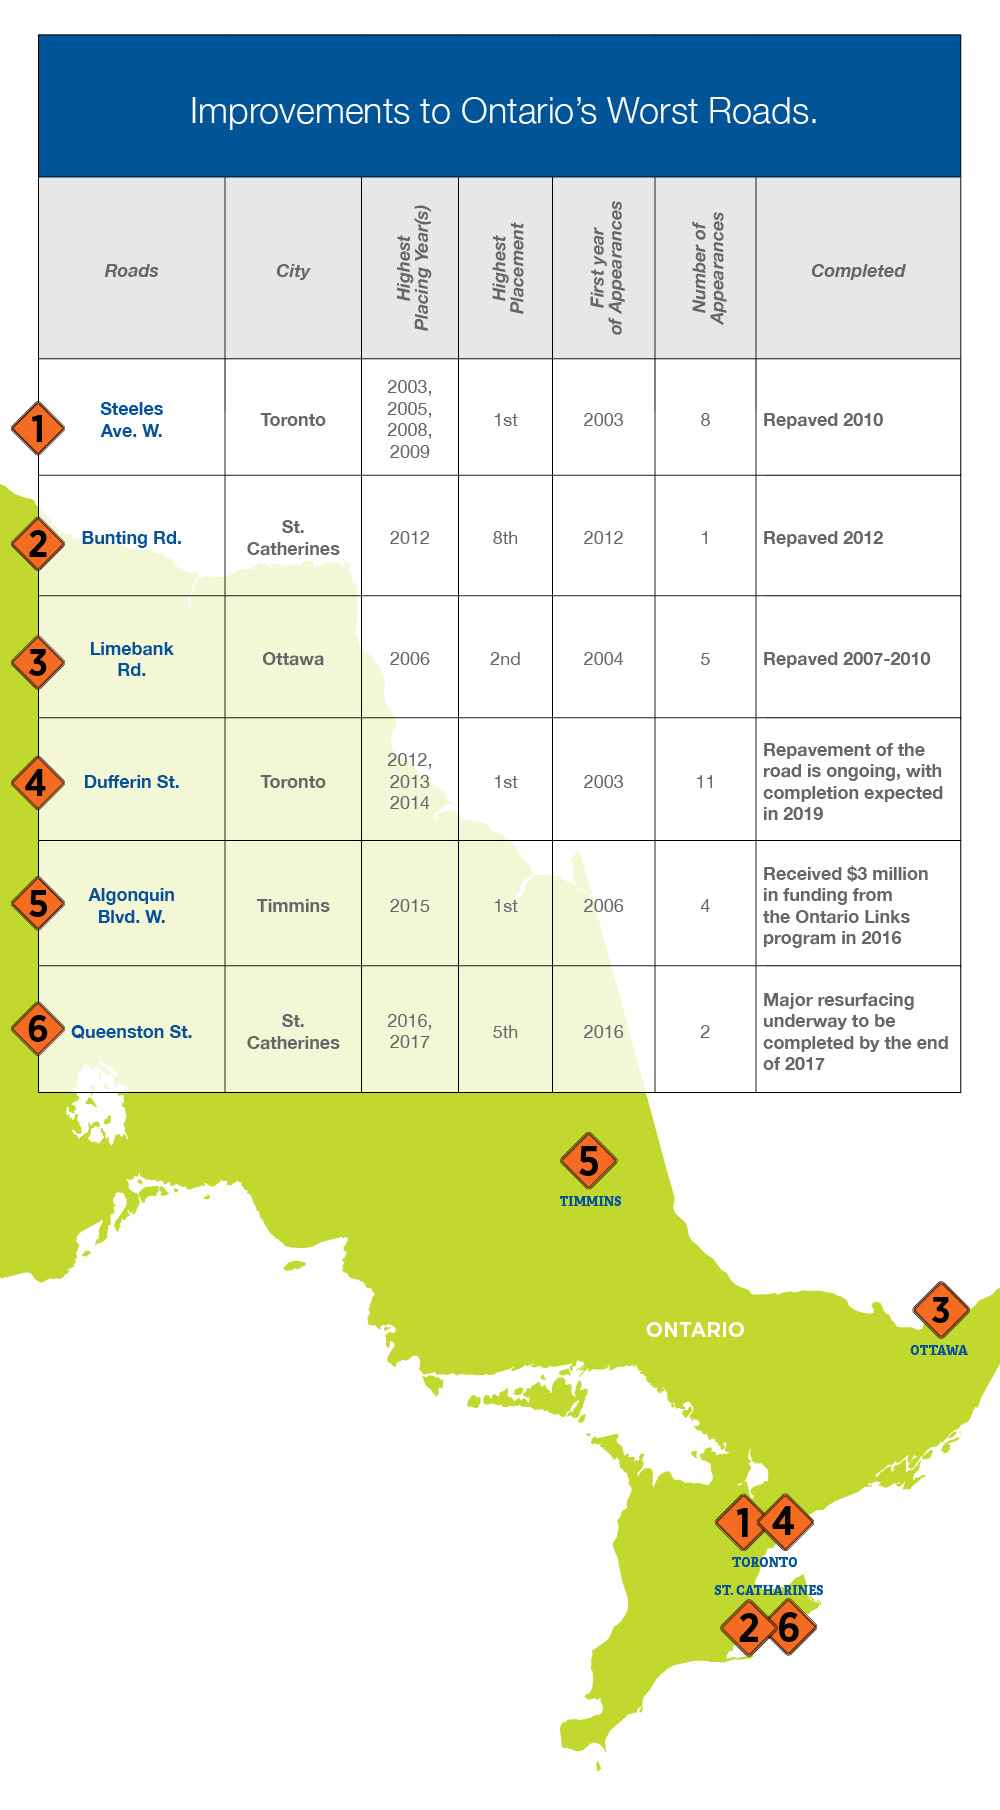 Improvements to Ontario's Worst Roads chart by roads and cities